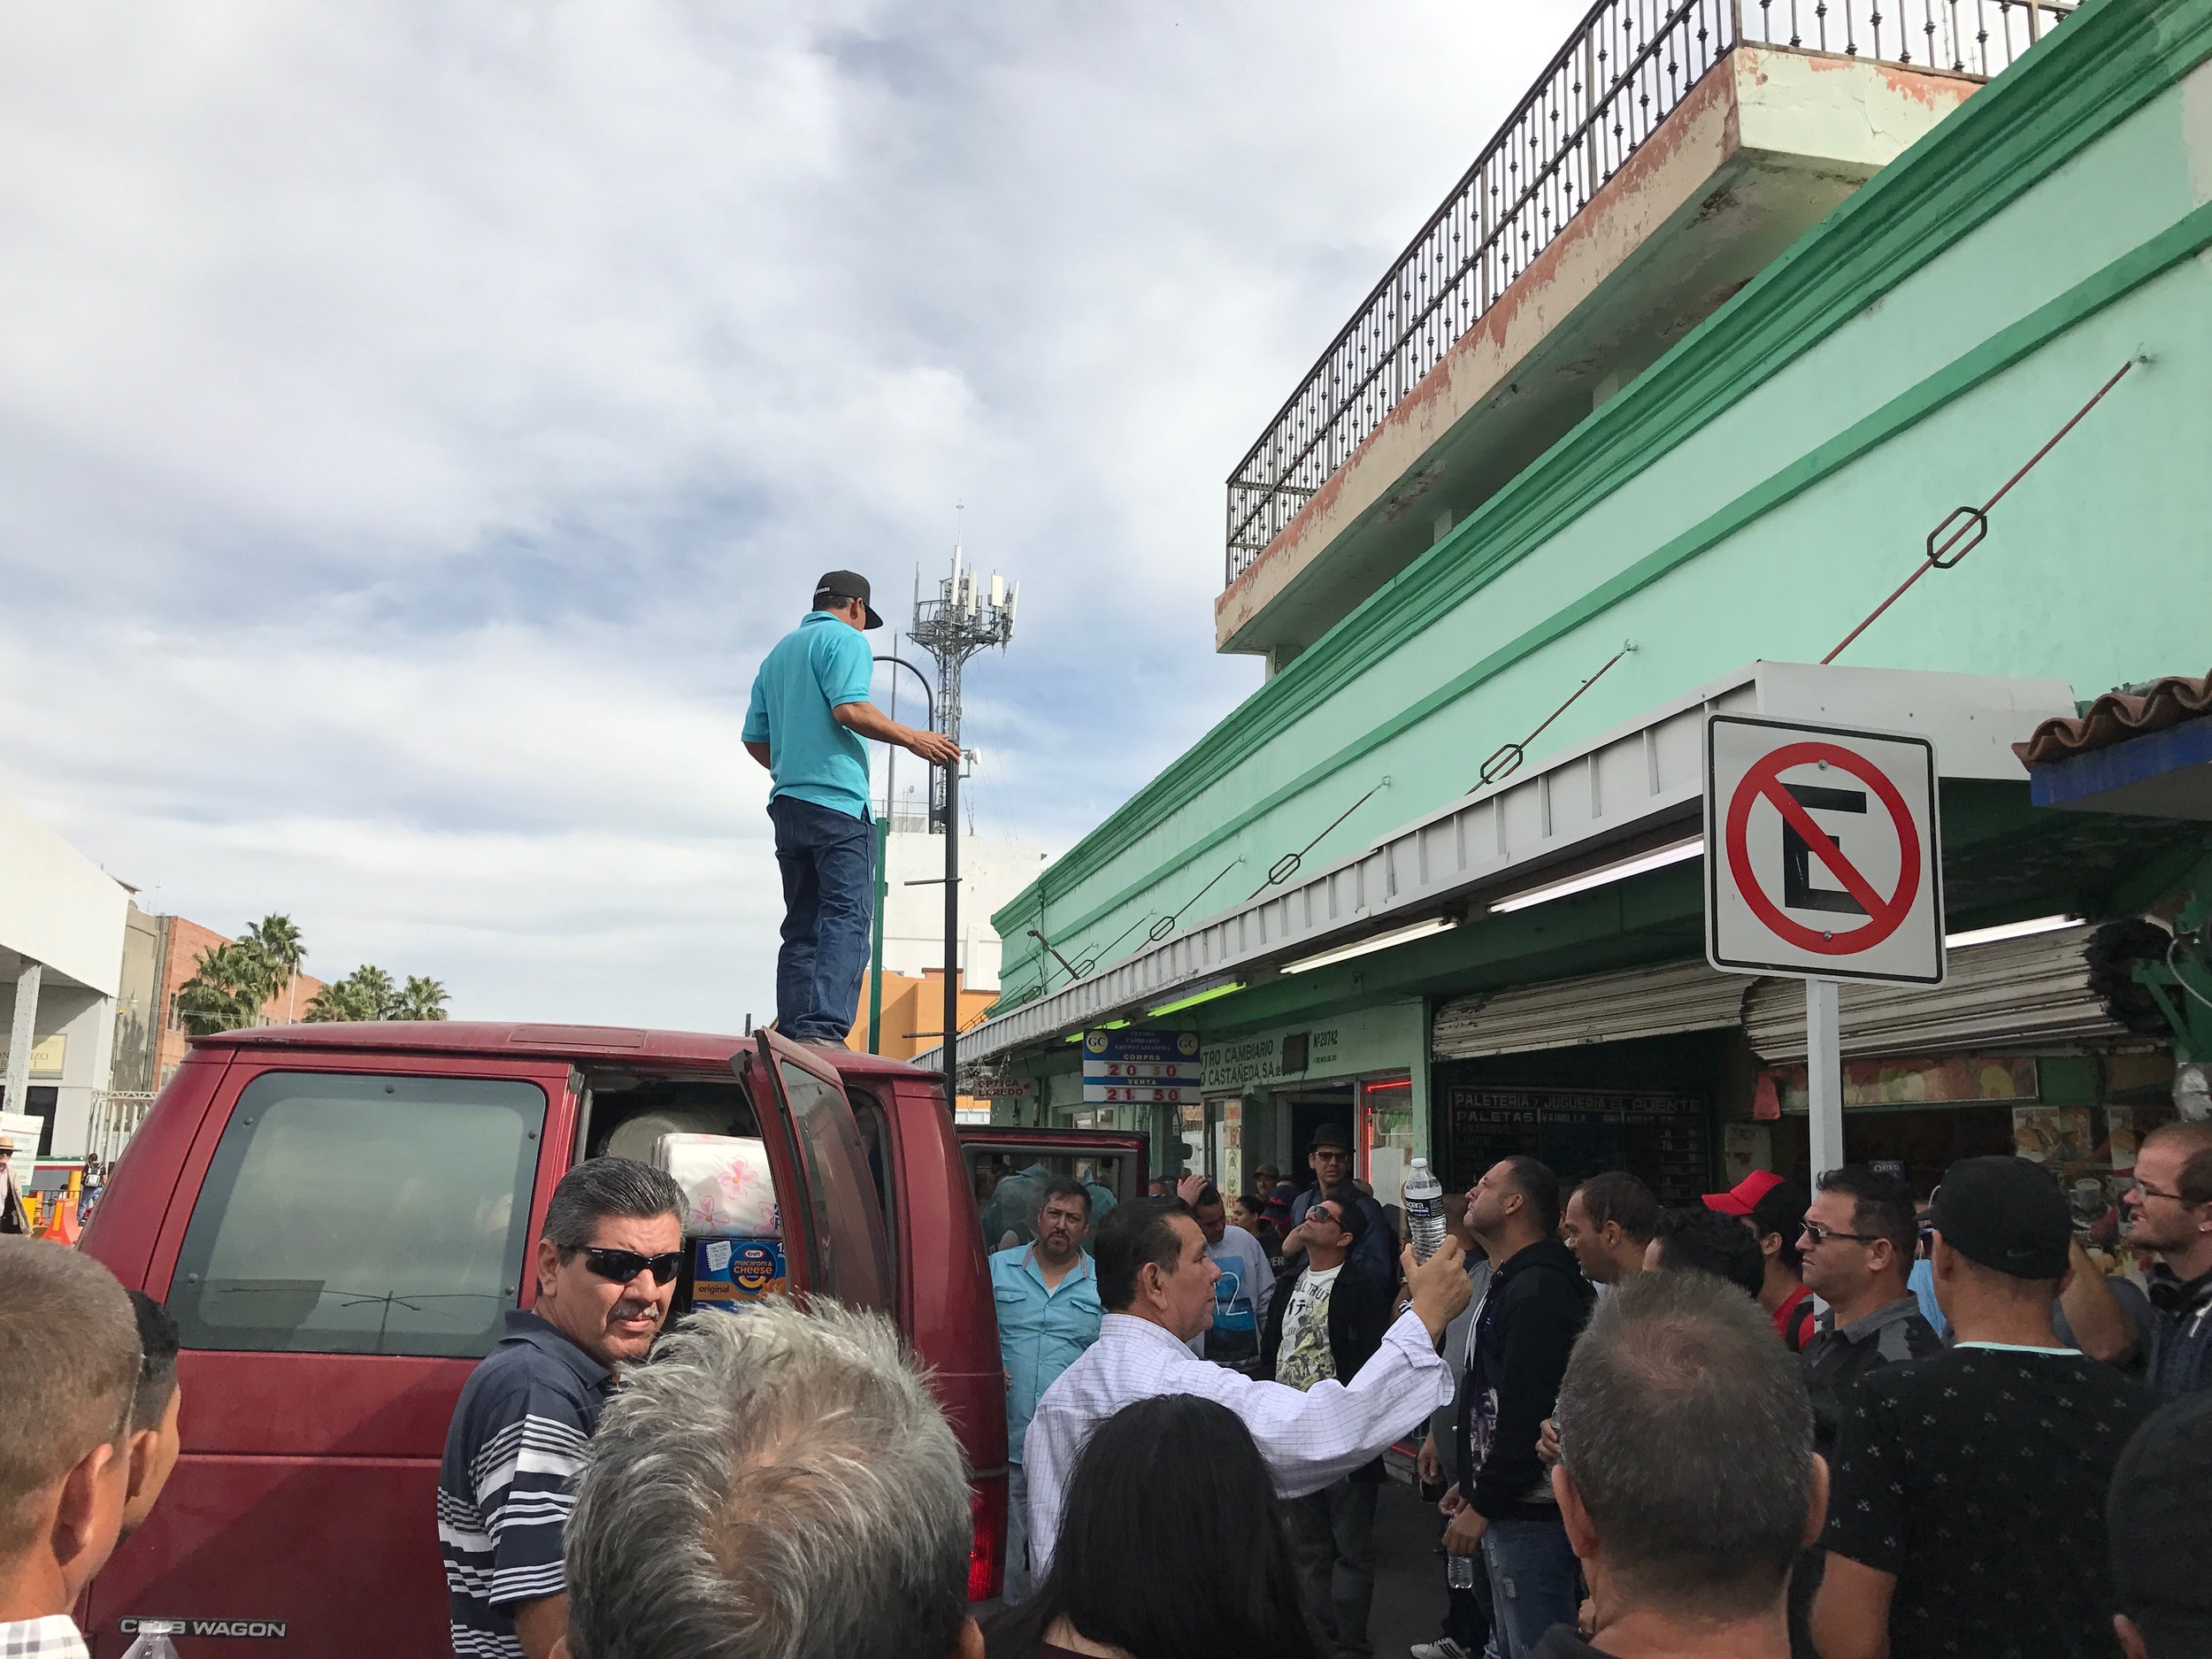  Arriving at a street corner in Nuevo Laredo with water to share, a pastor with the Baptist church network offers a blessing and prayer for the Cuban migrant community congregating in the streets.&nbsp; 